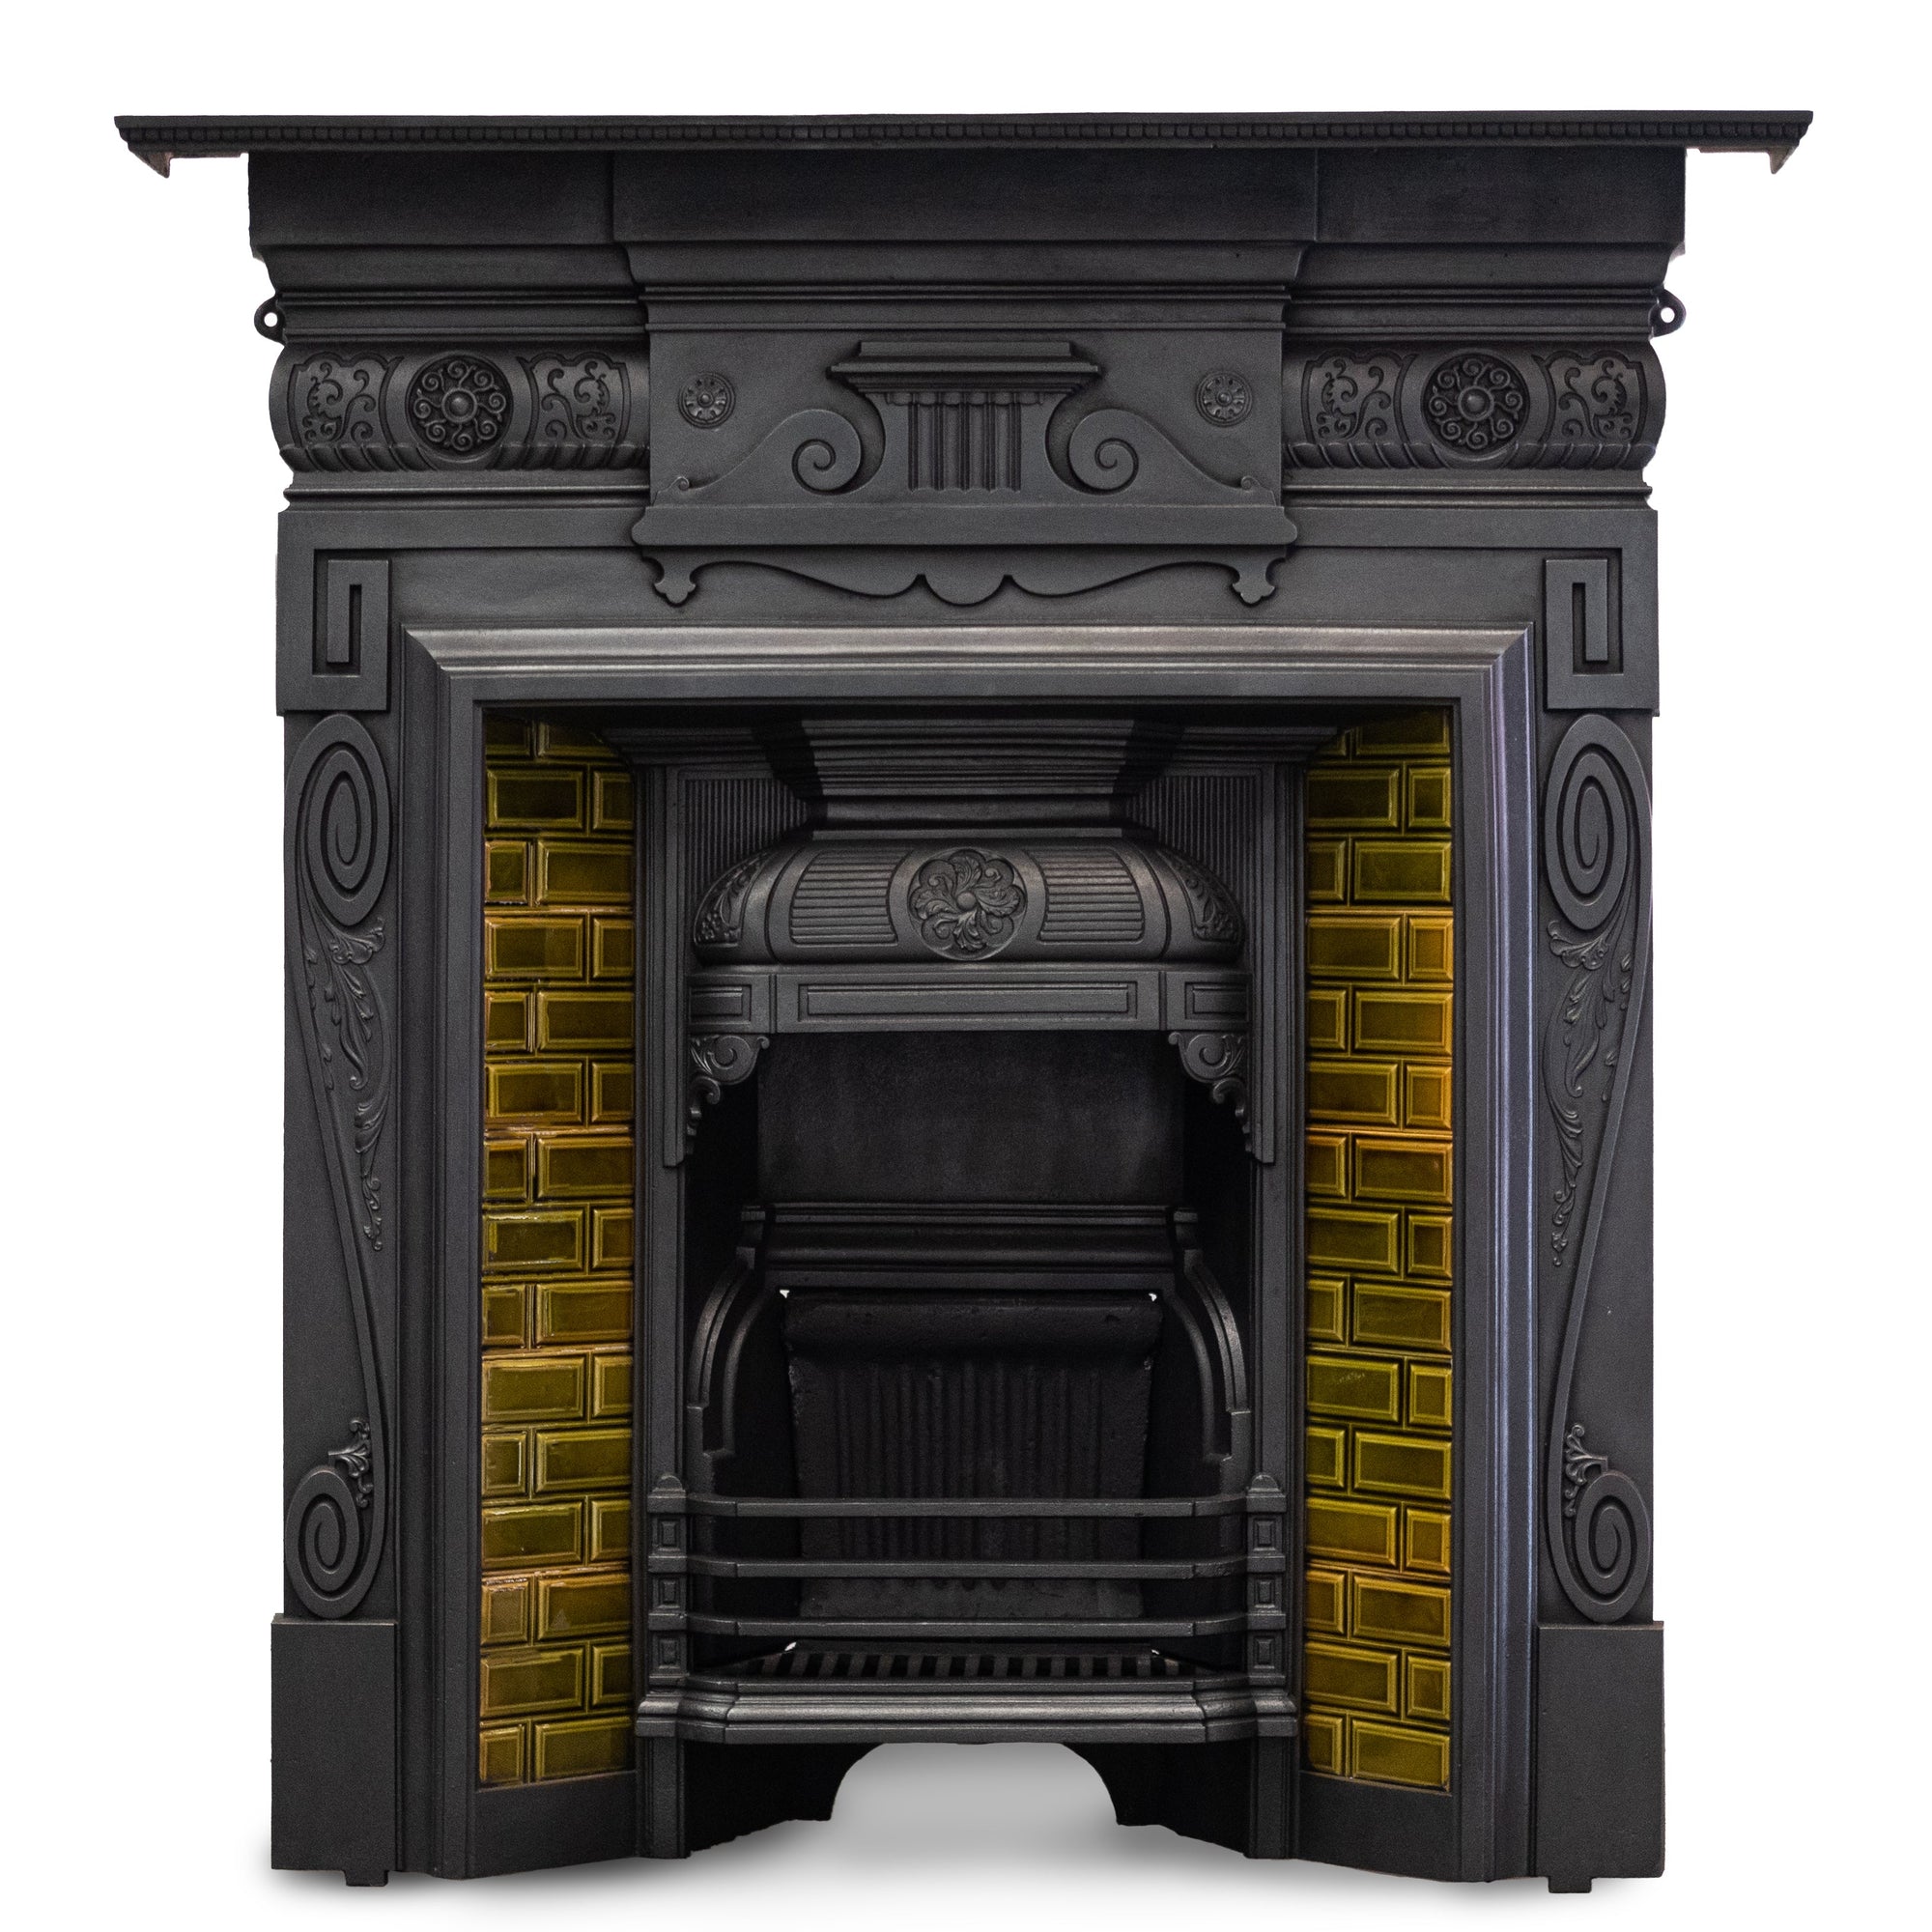 Antique Victorian Combination Fireplace with Green Tiles | The Architectural Forum